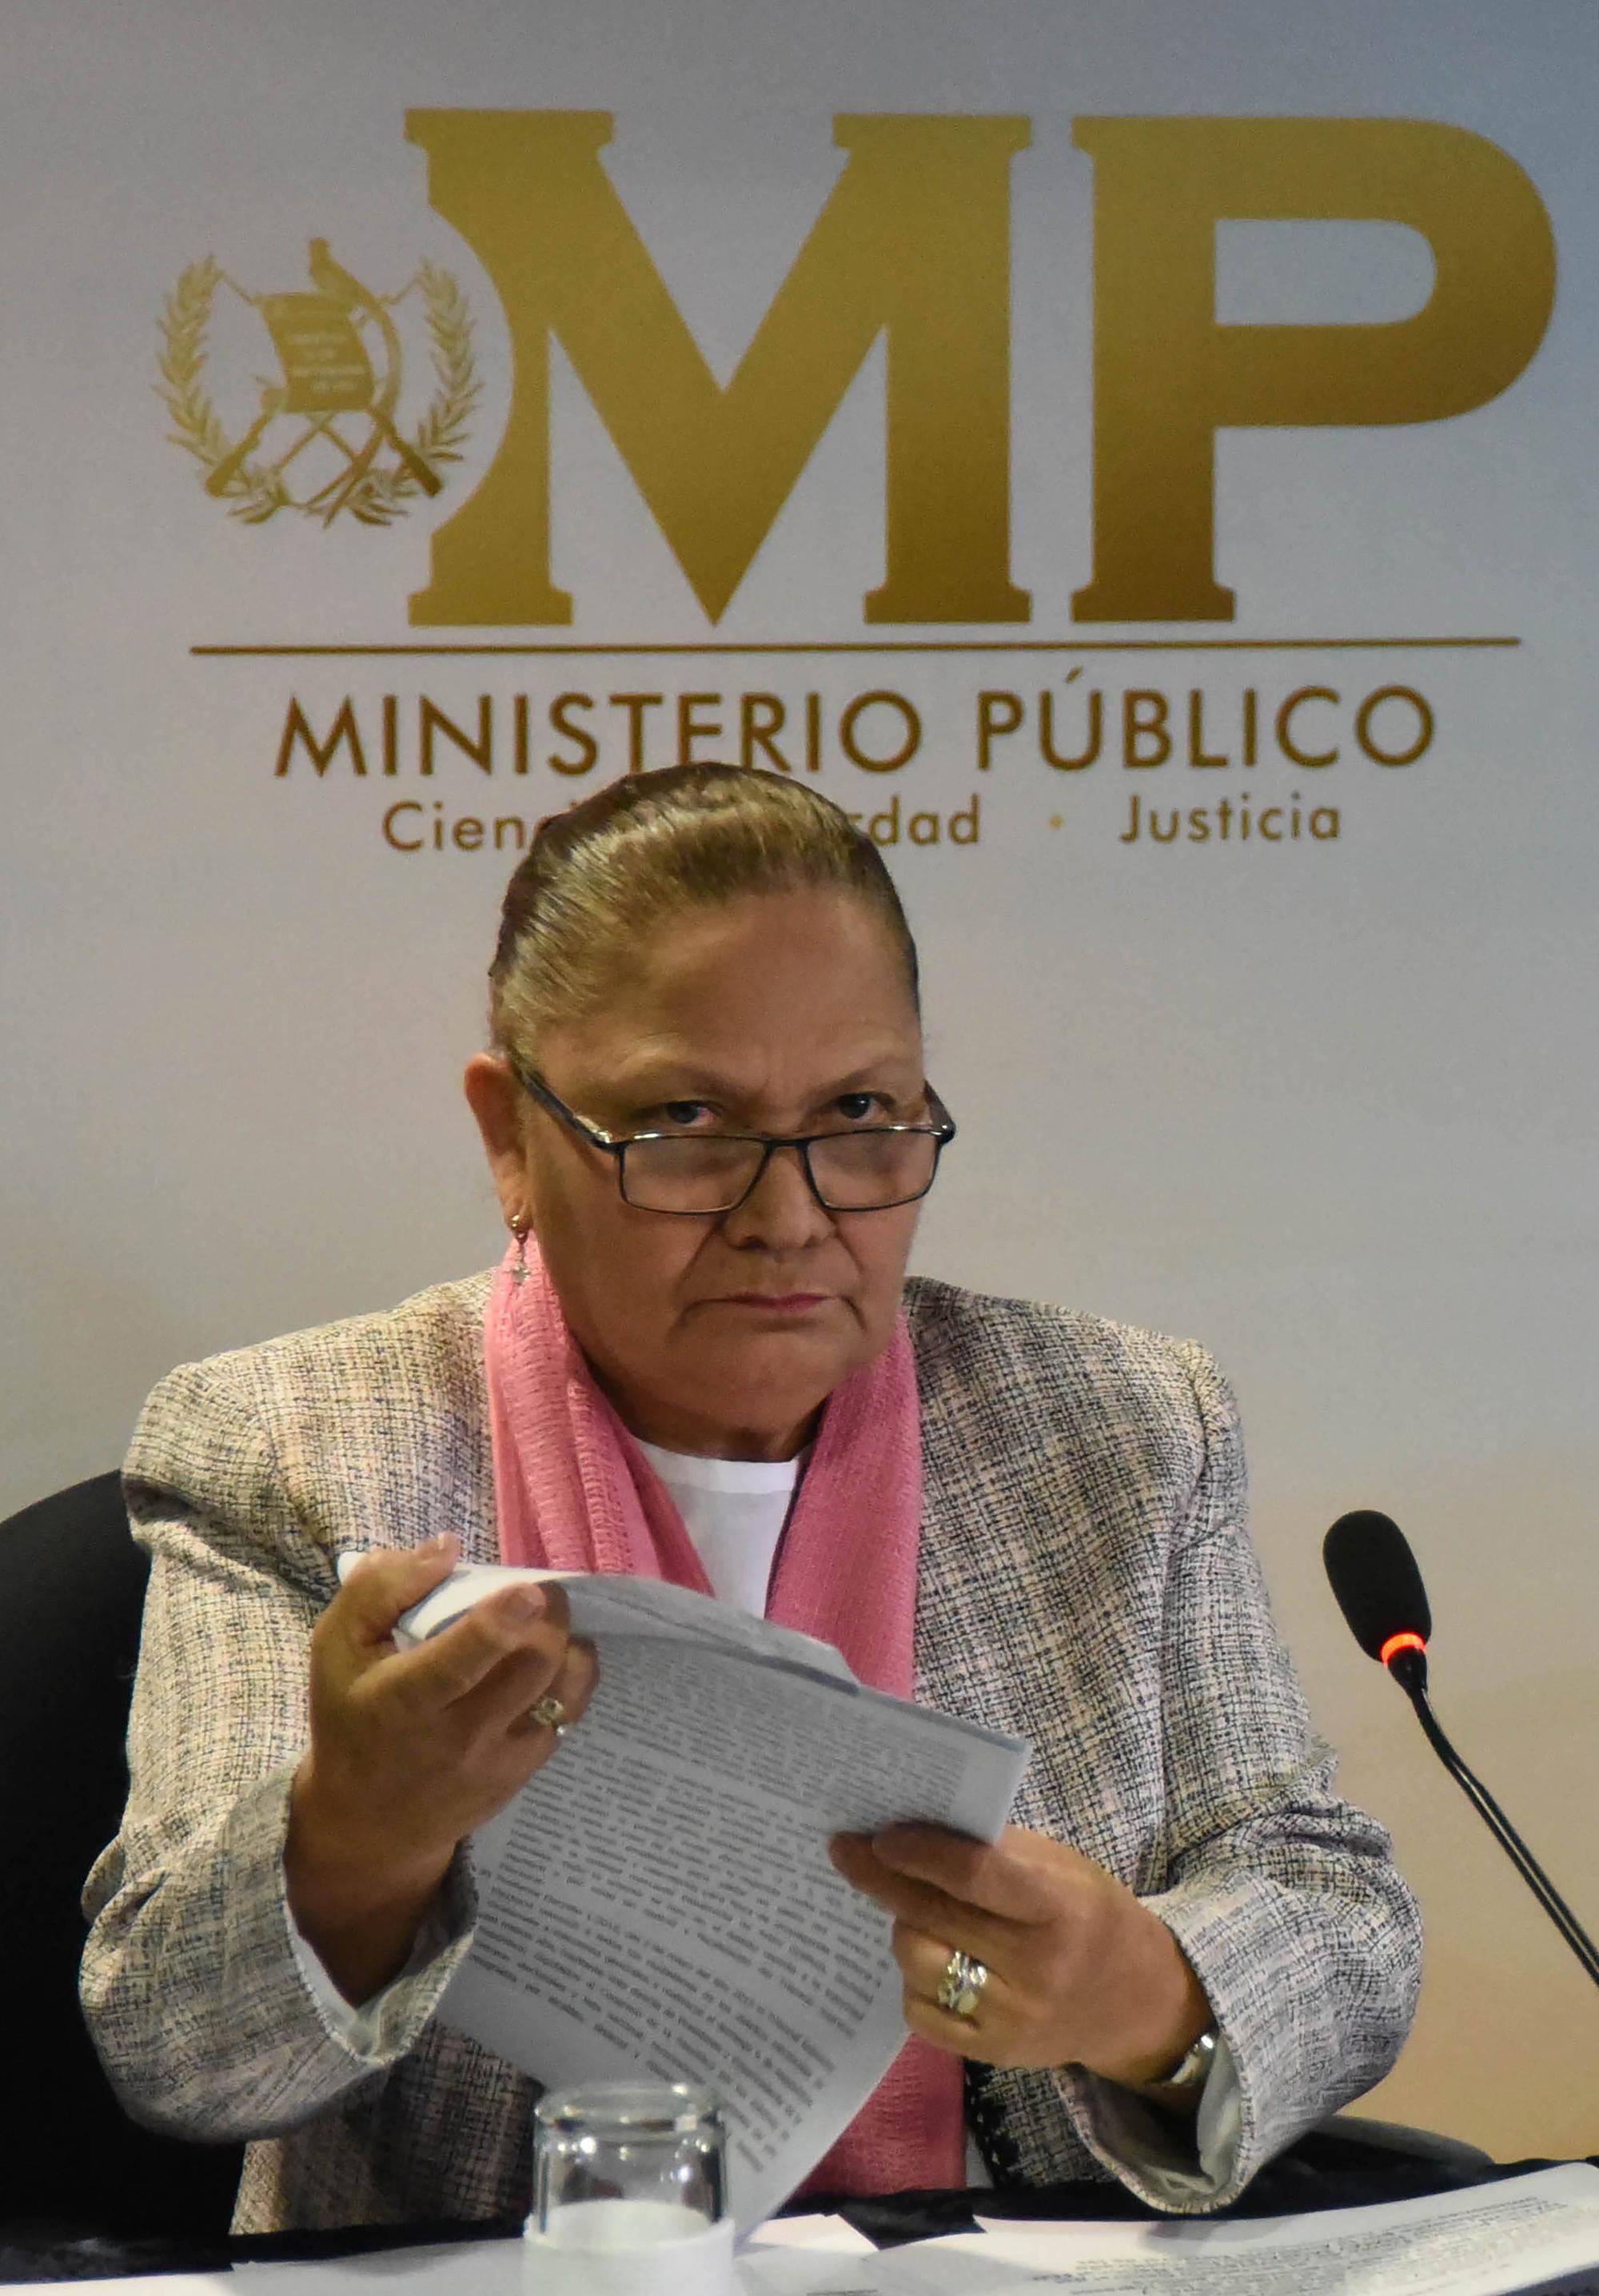 Guatemalan Attorney General Consuelo Porras speaks during a press conference with the head of the International Commission Against Impunity in Guatemala (CICIG), Colombian Ivan Velasquez (out of frame), in Guatemala City on August 10, 2018. - The prosecutor